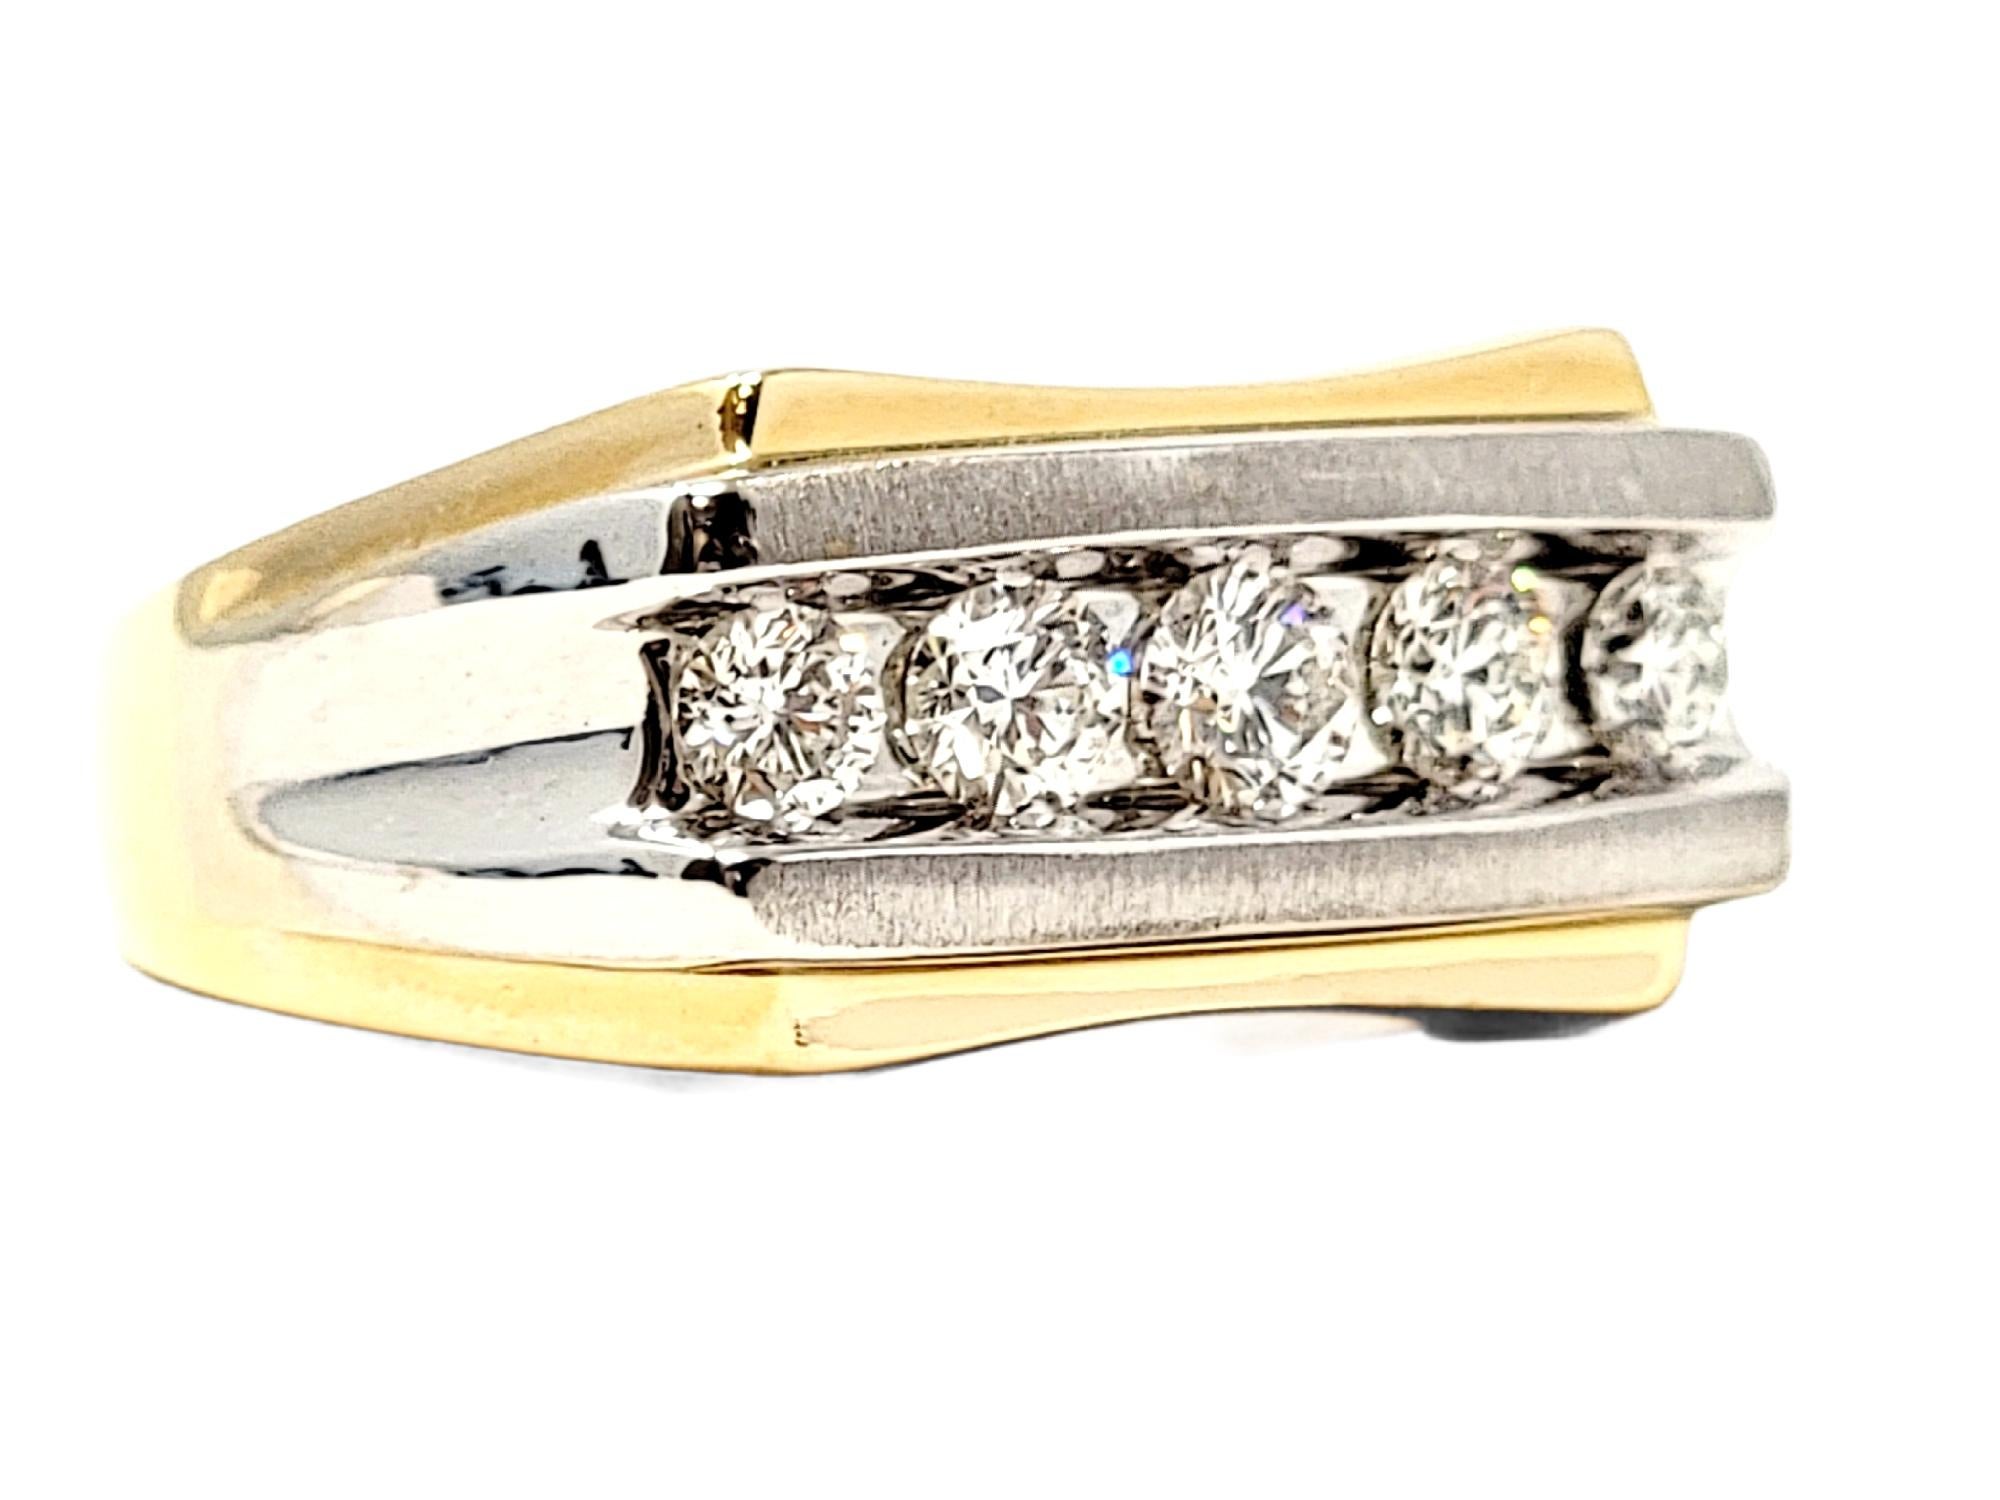 Ring size: 11

Sleek, handsome band ring embellished with sparkling round diamonds and a unique two tone gold finish. This masculine band ring features 5 bright white diamonds channel set in a single row at the center of a brushed 14 karat white